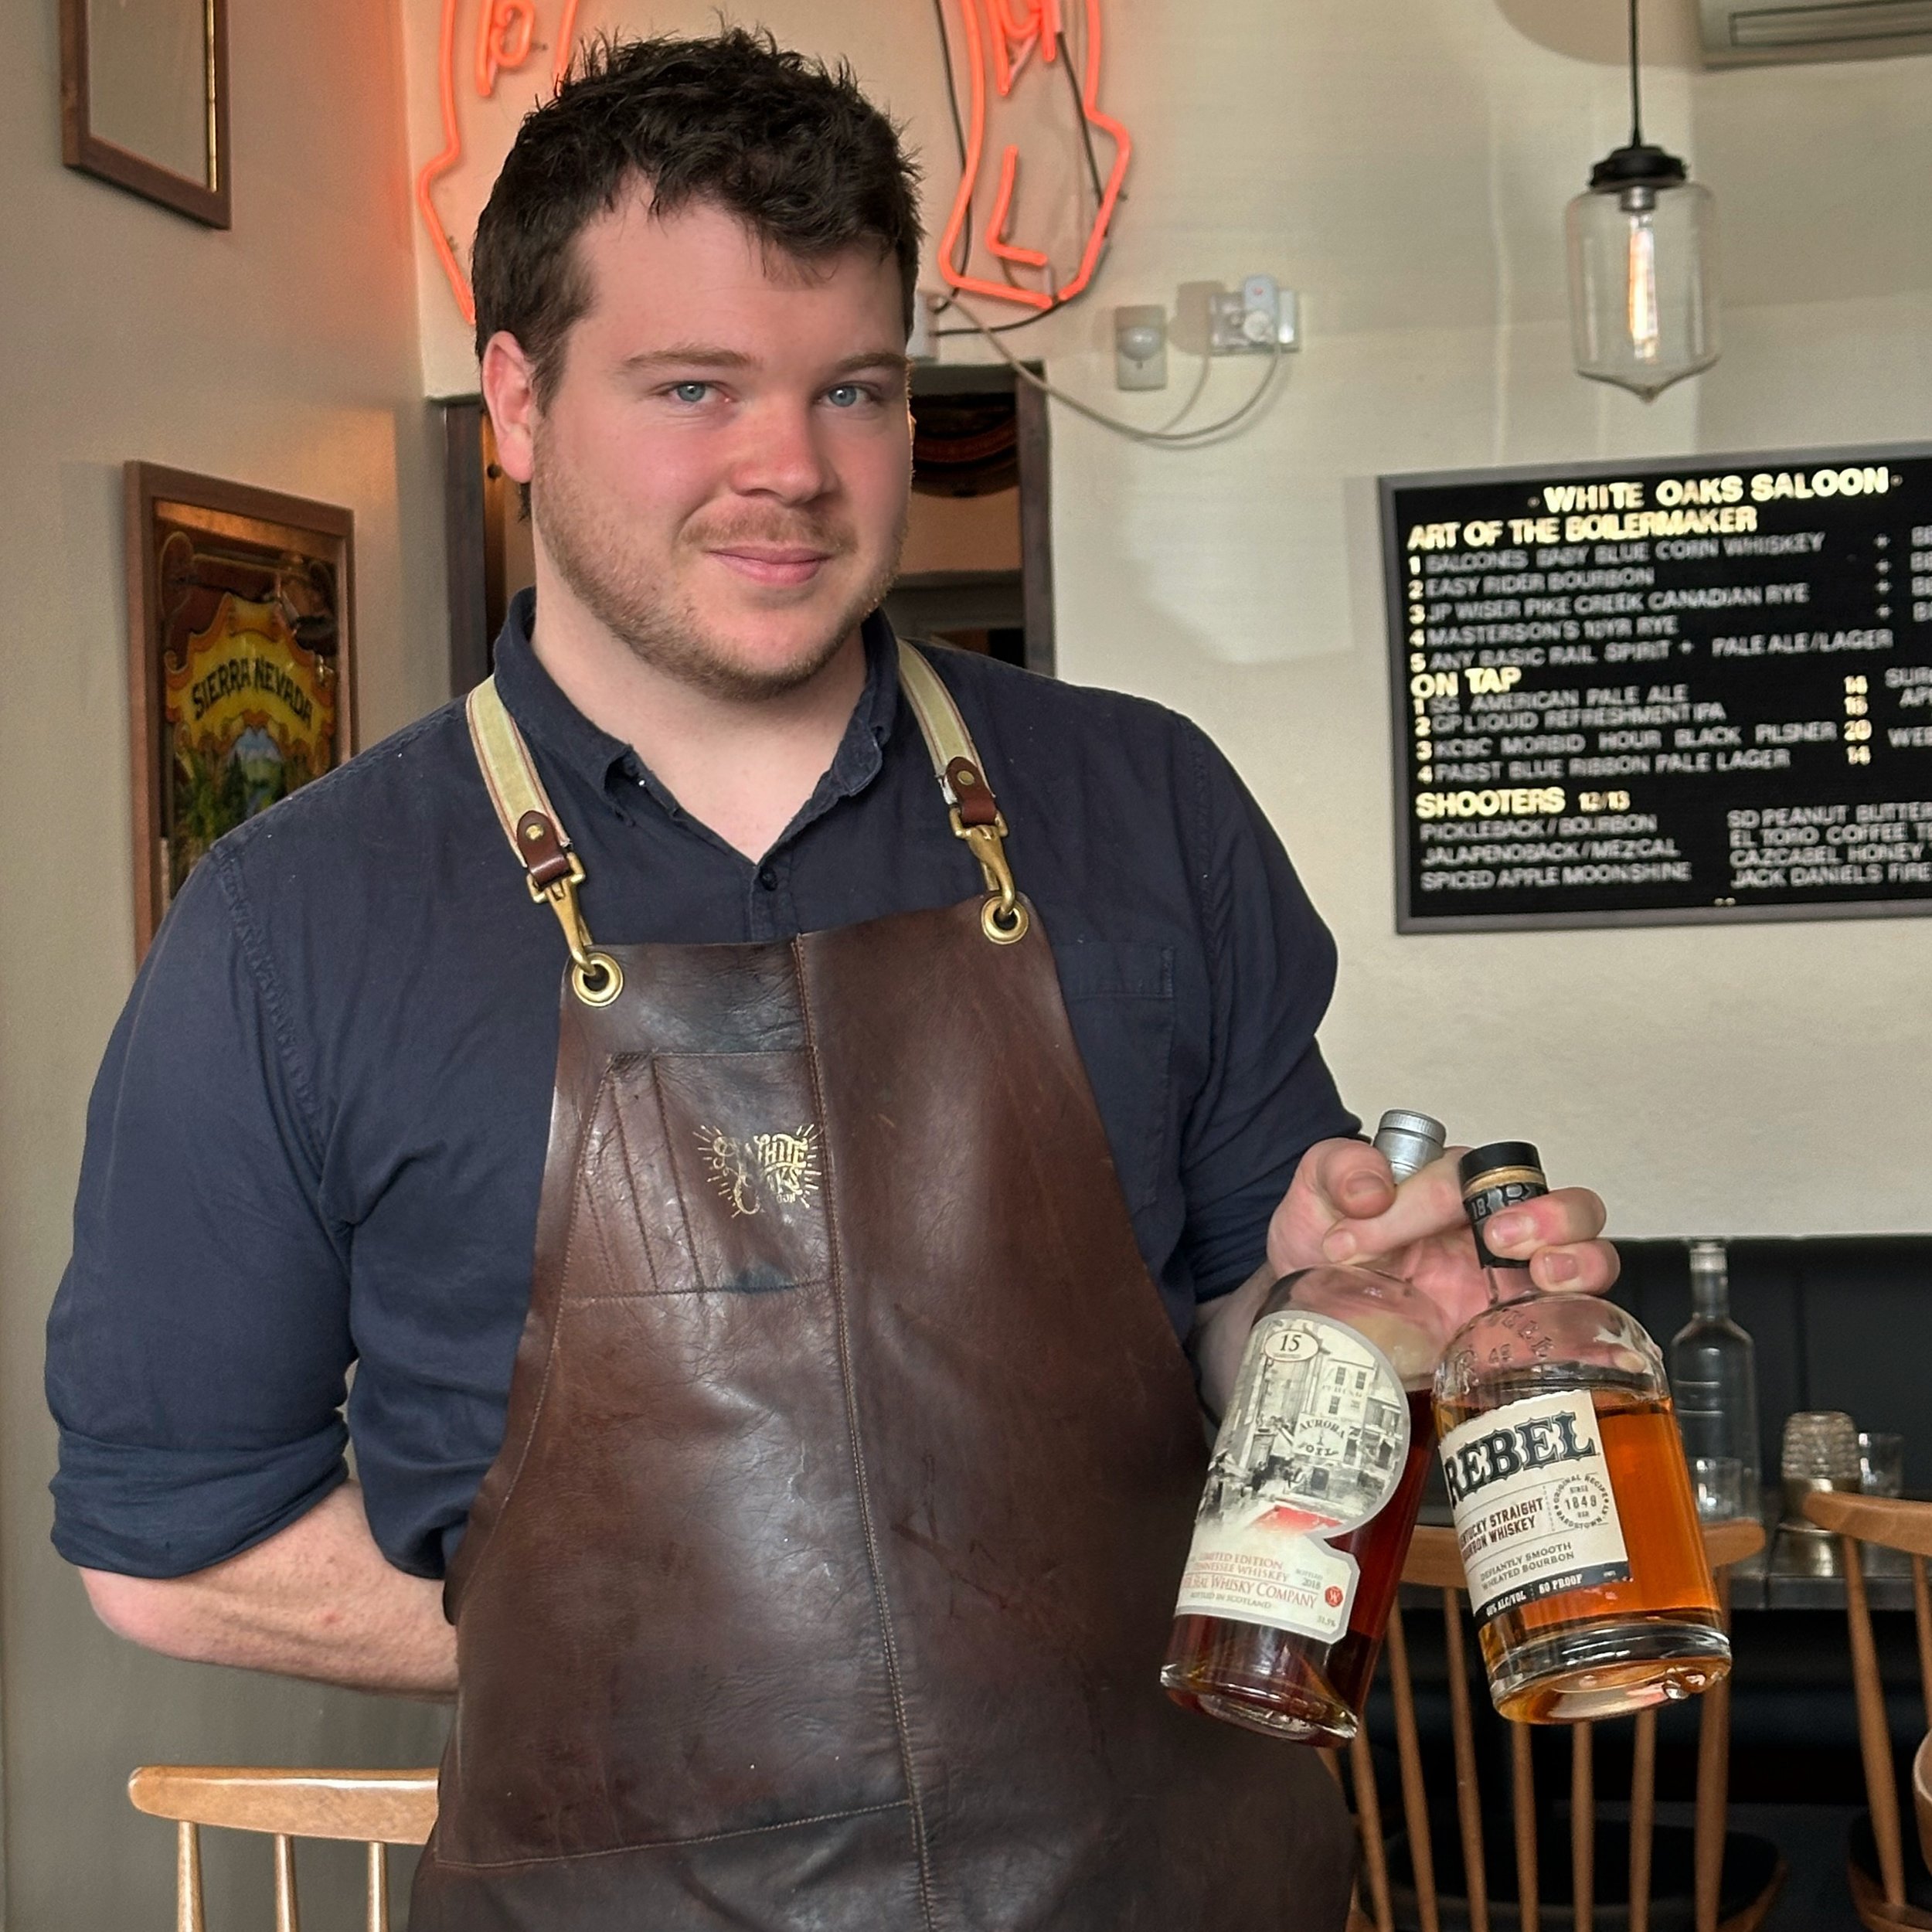 Introducing Hamish, one of our talented bartenders! 

With a keen enthusiasm for cocktails and whiskey, he&rsquo;s always ready to offer recommendations. Feel free to strike up a conversation and discover new favorites!

Bookings via the link in our 